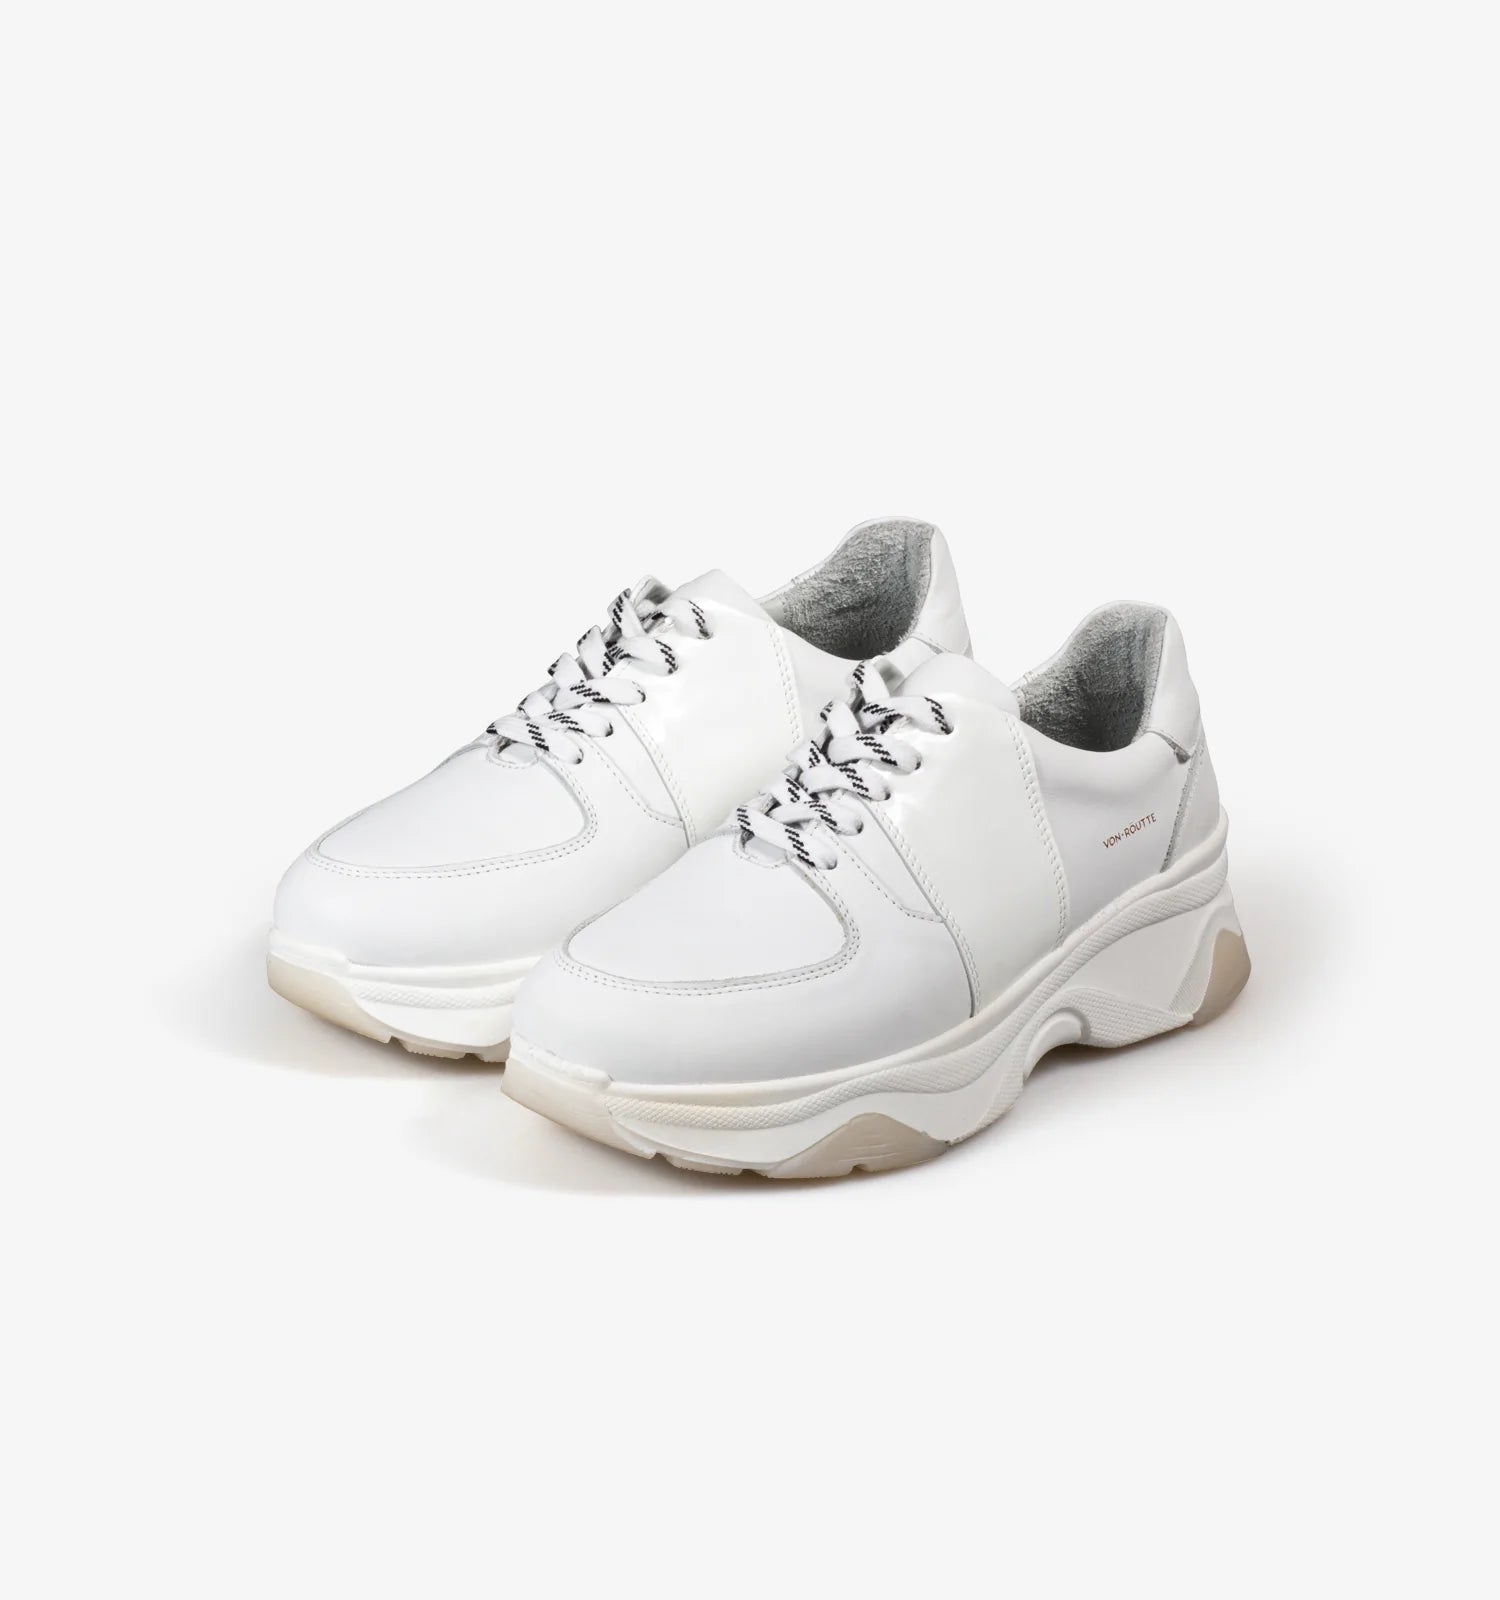 Austin Chunky Sneakers in White Patent